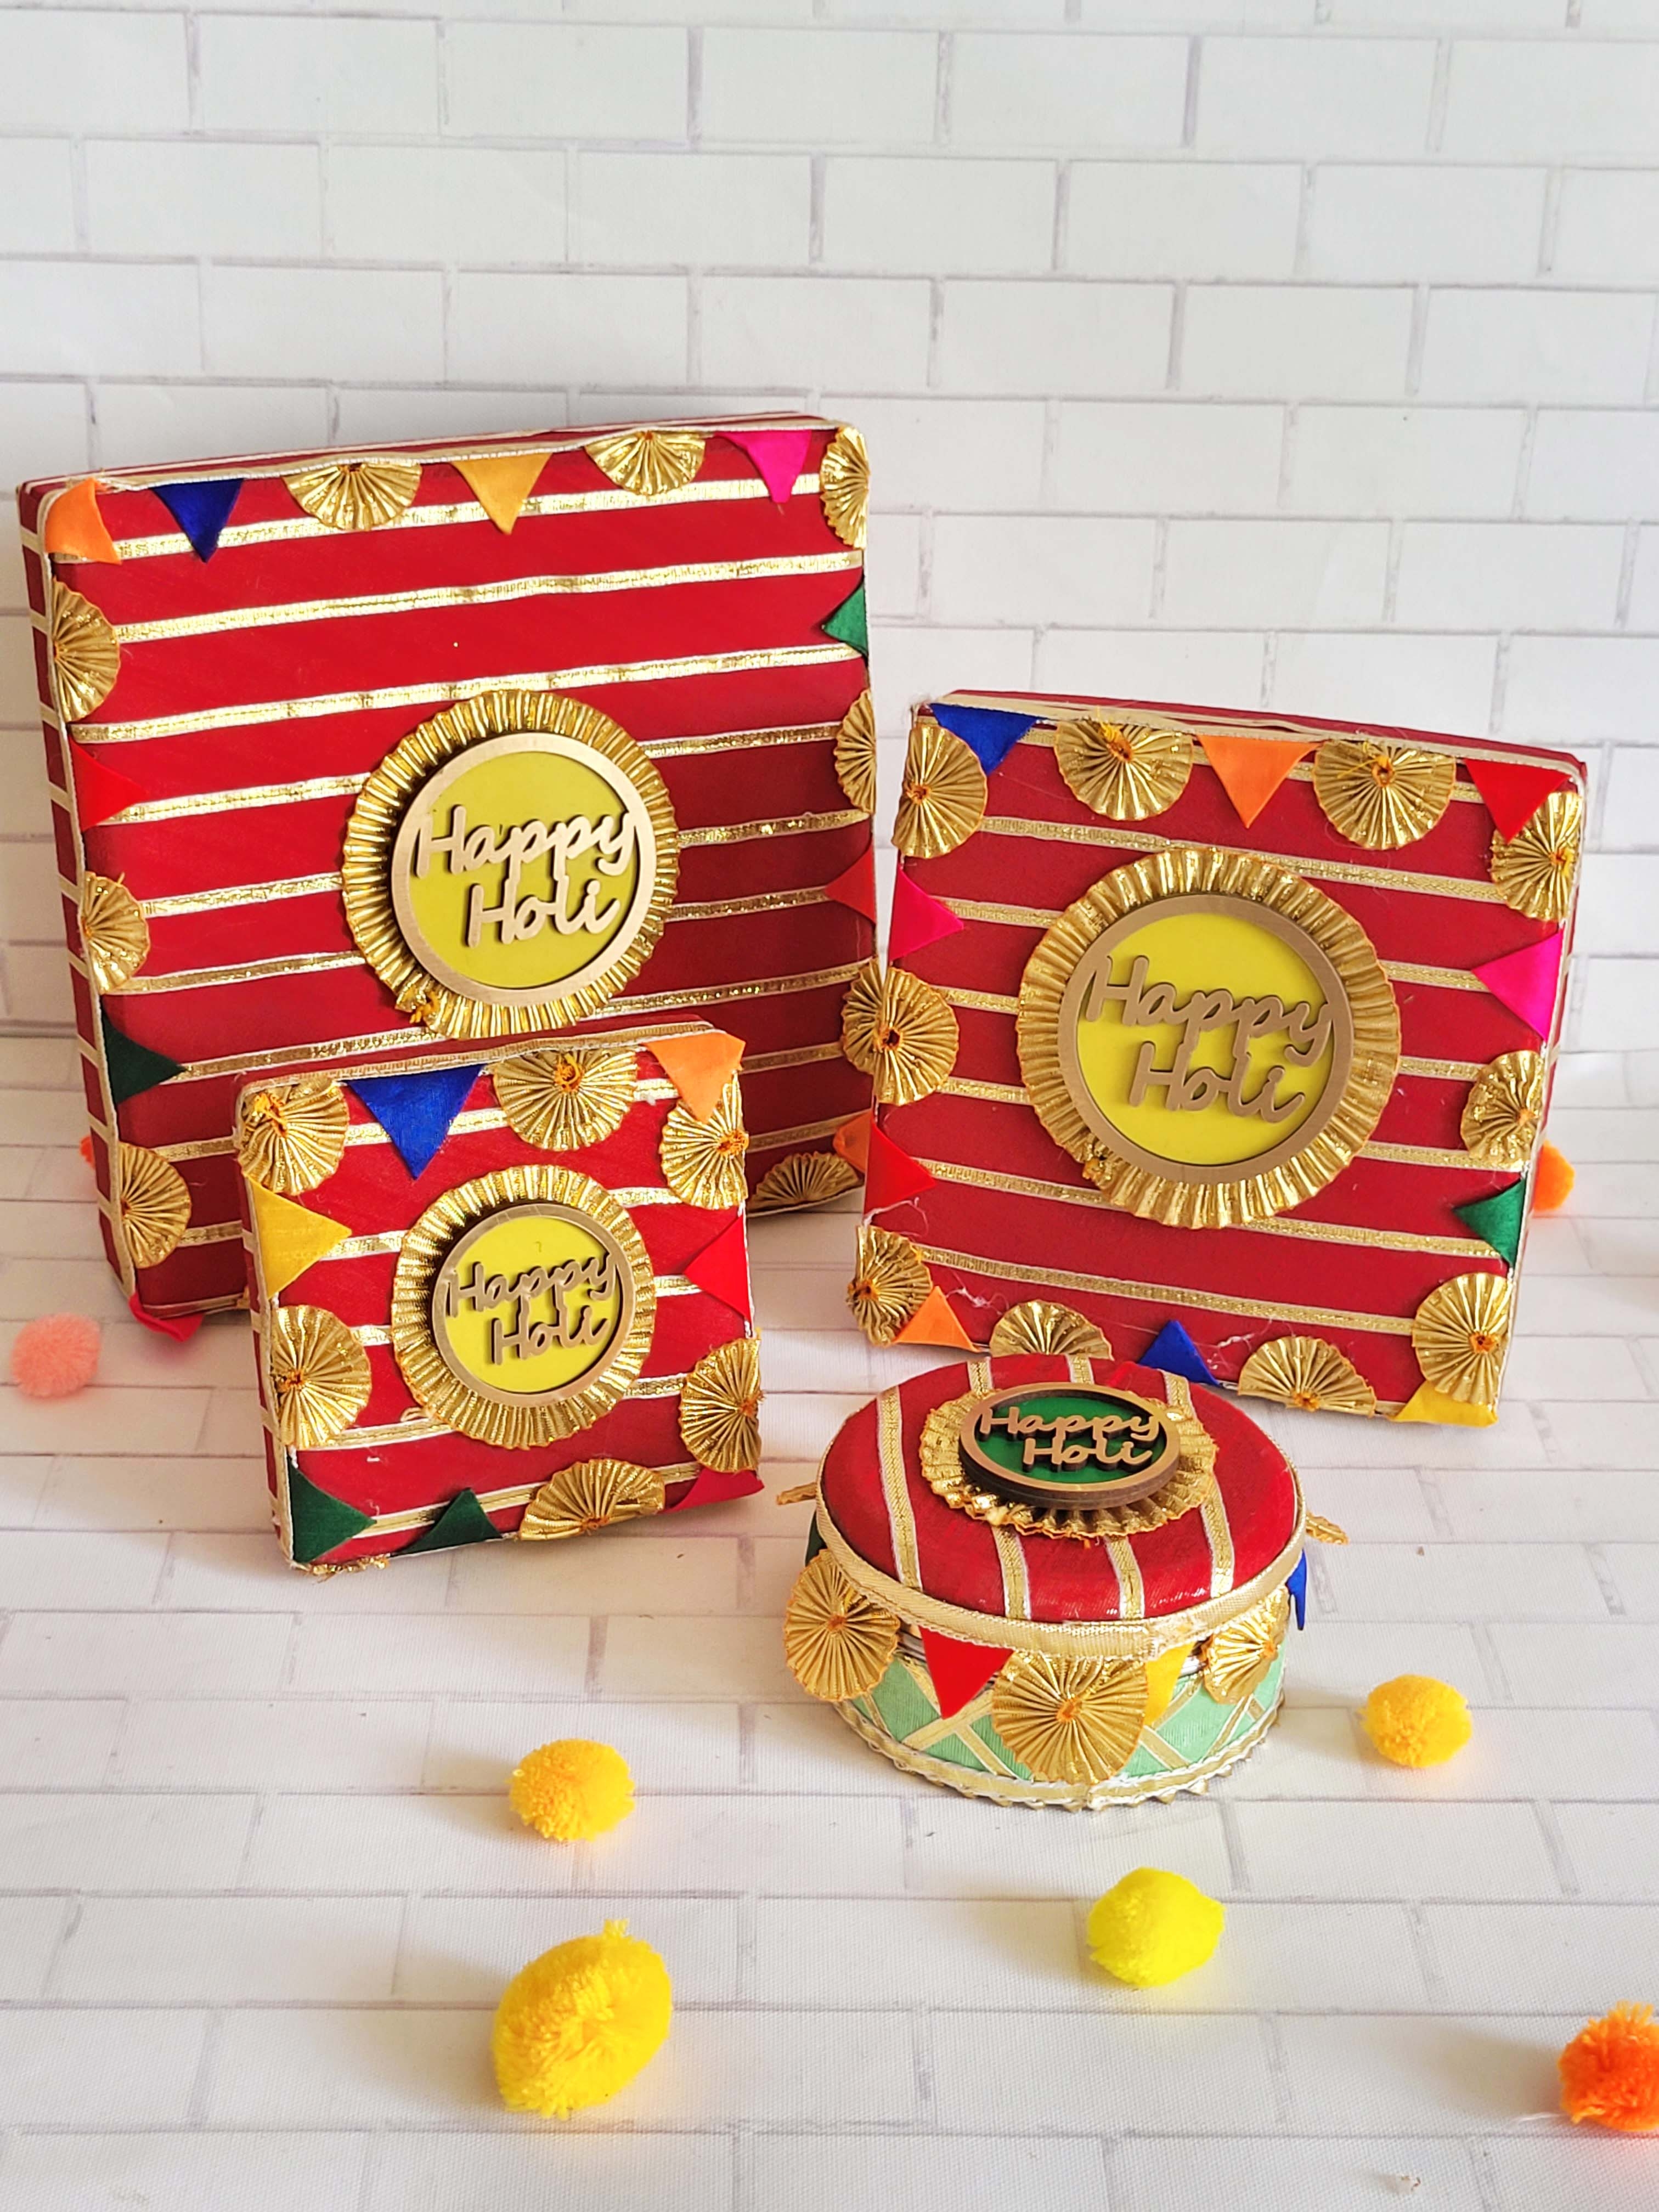 Floral art | Happy Holi Box Sets-Red undefined